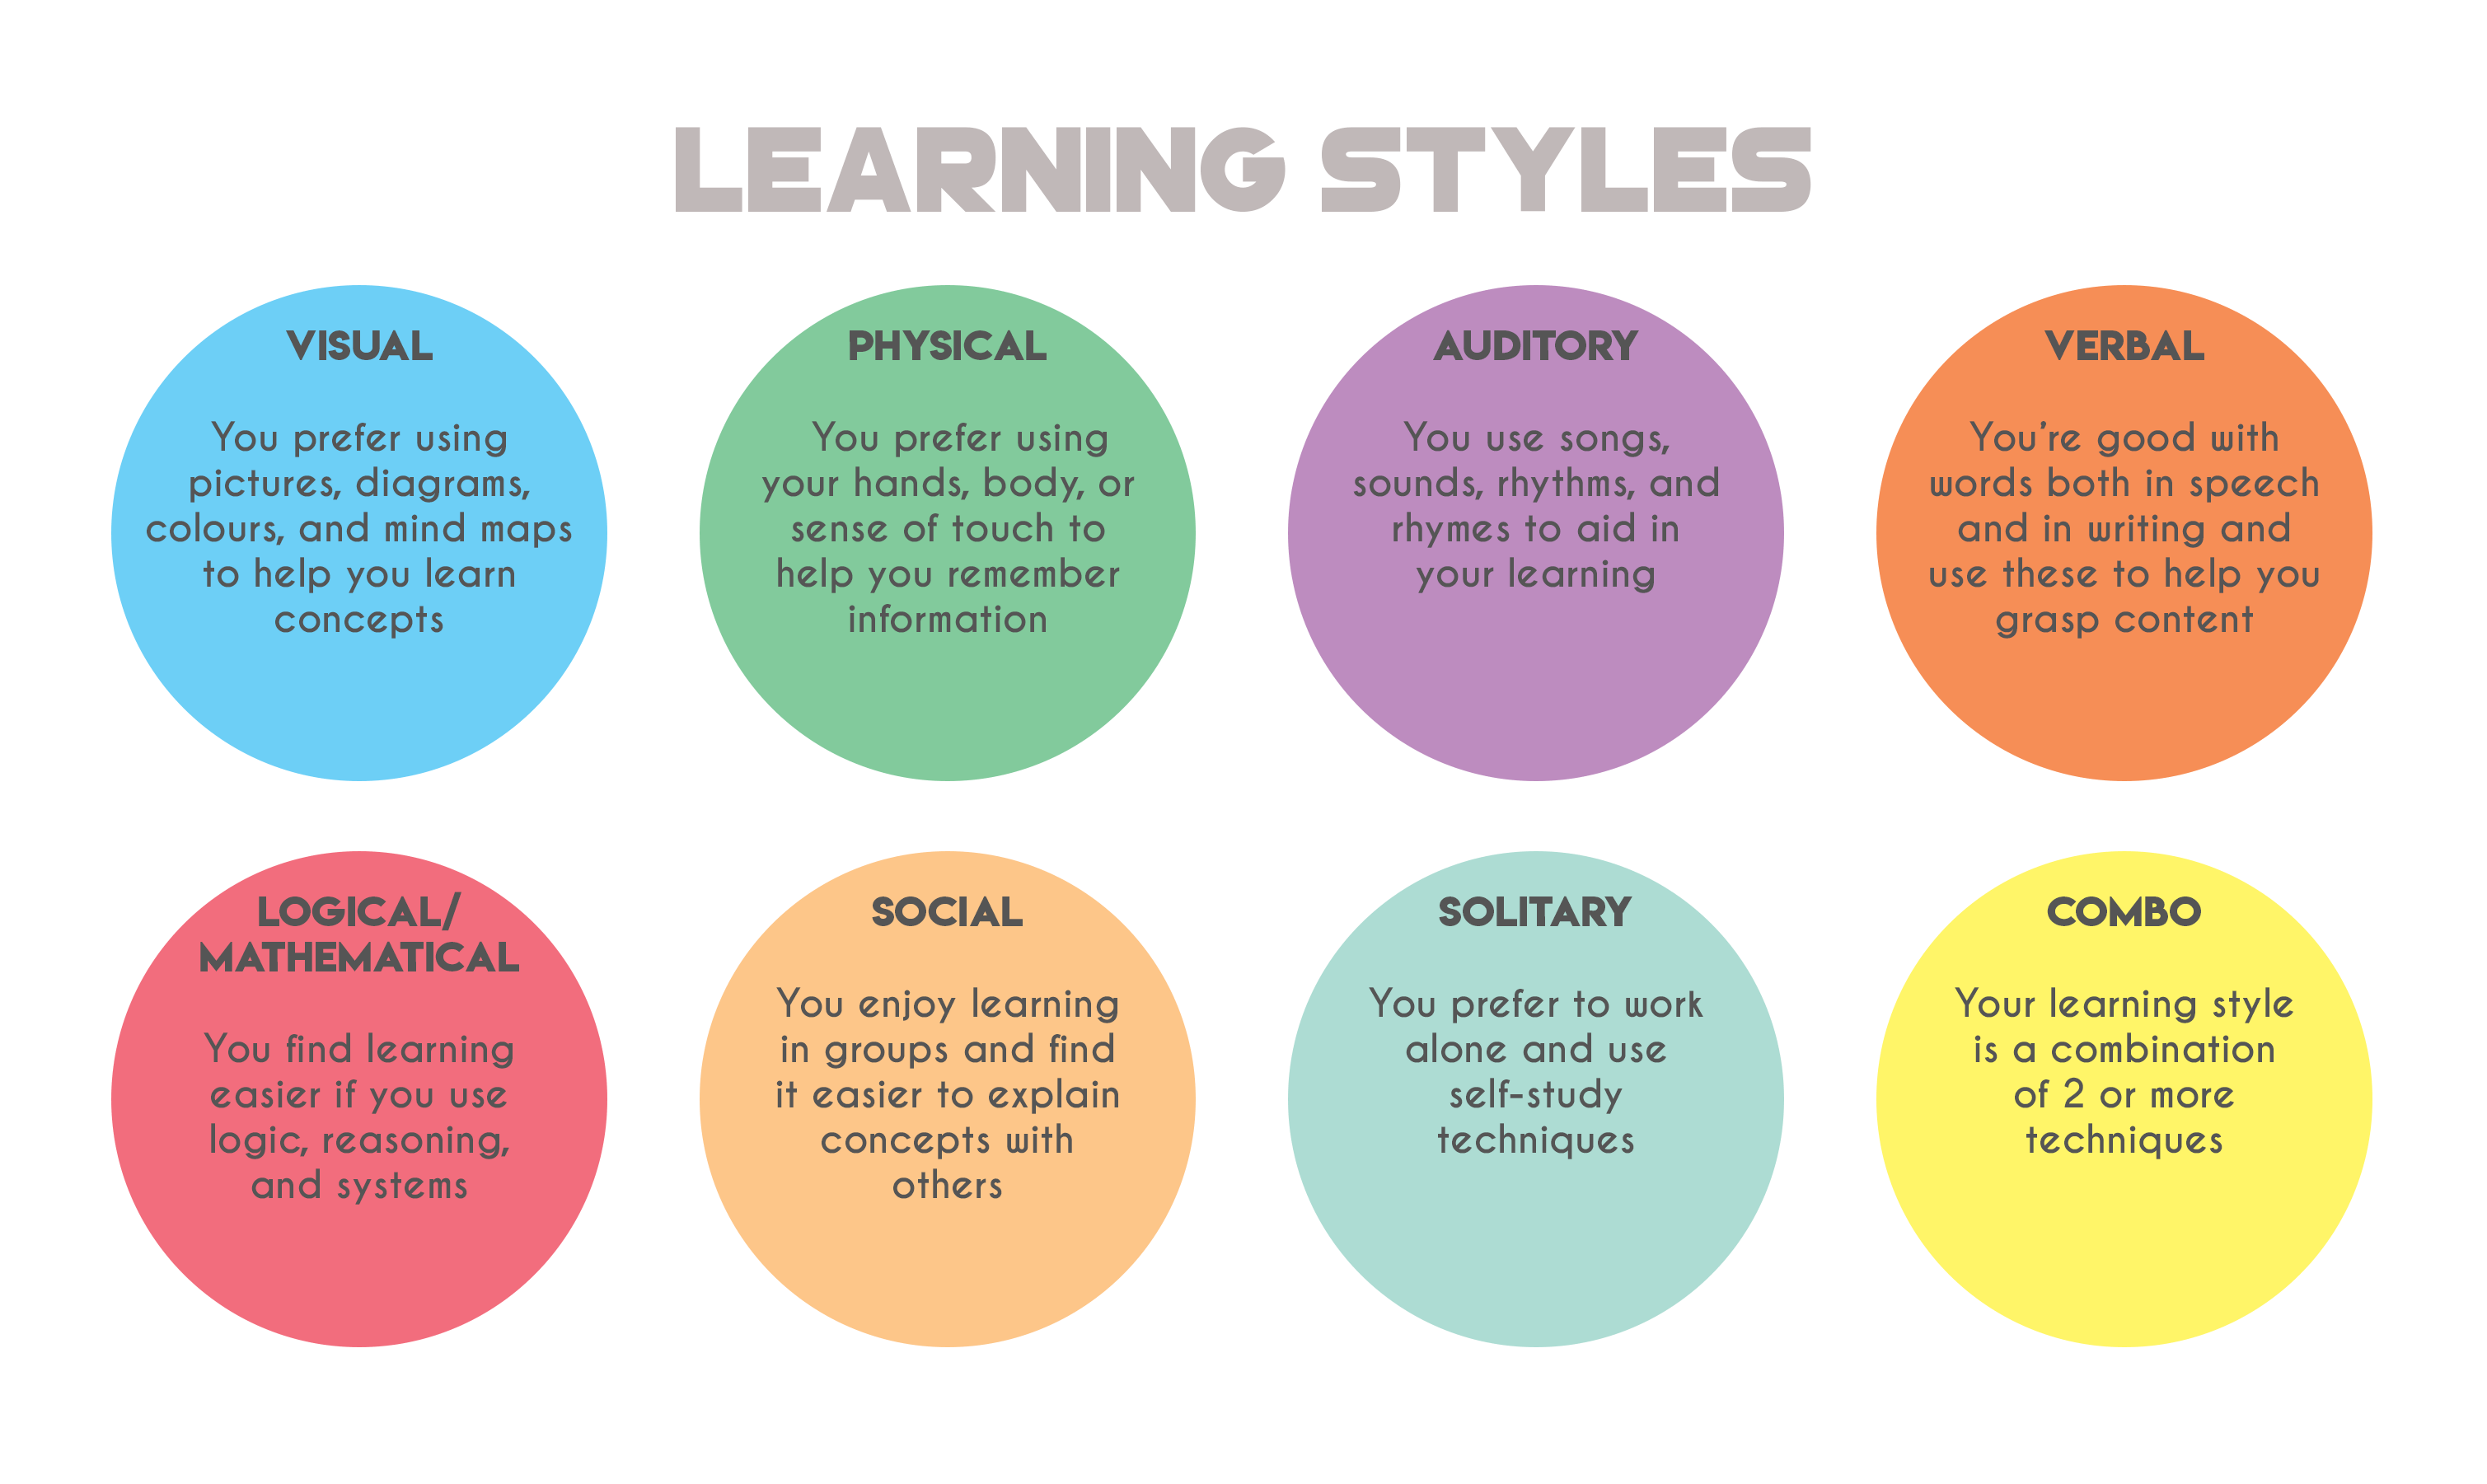 Language teaching techniques. Learning Styles. Types of Learning Styles. Learning Styles and techniques. Different Learning Styles.